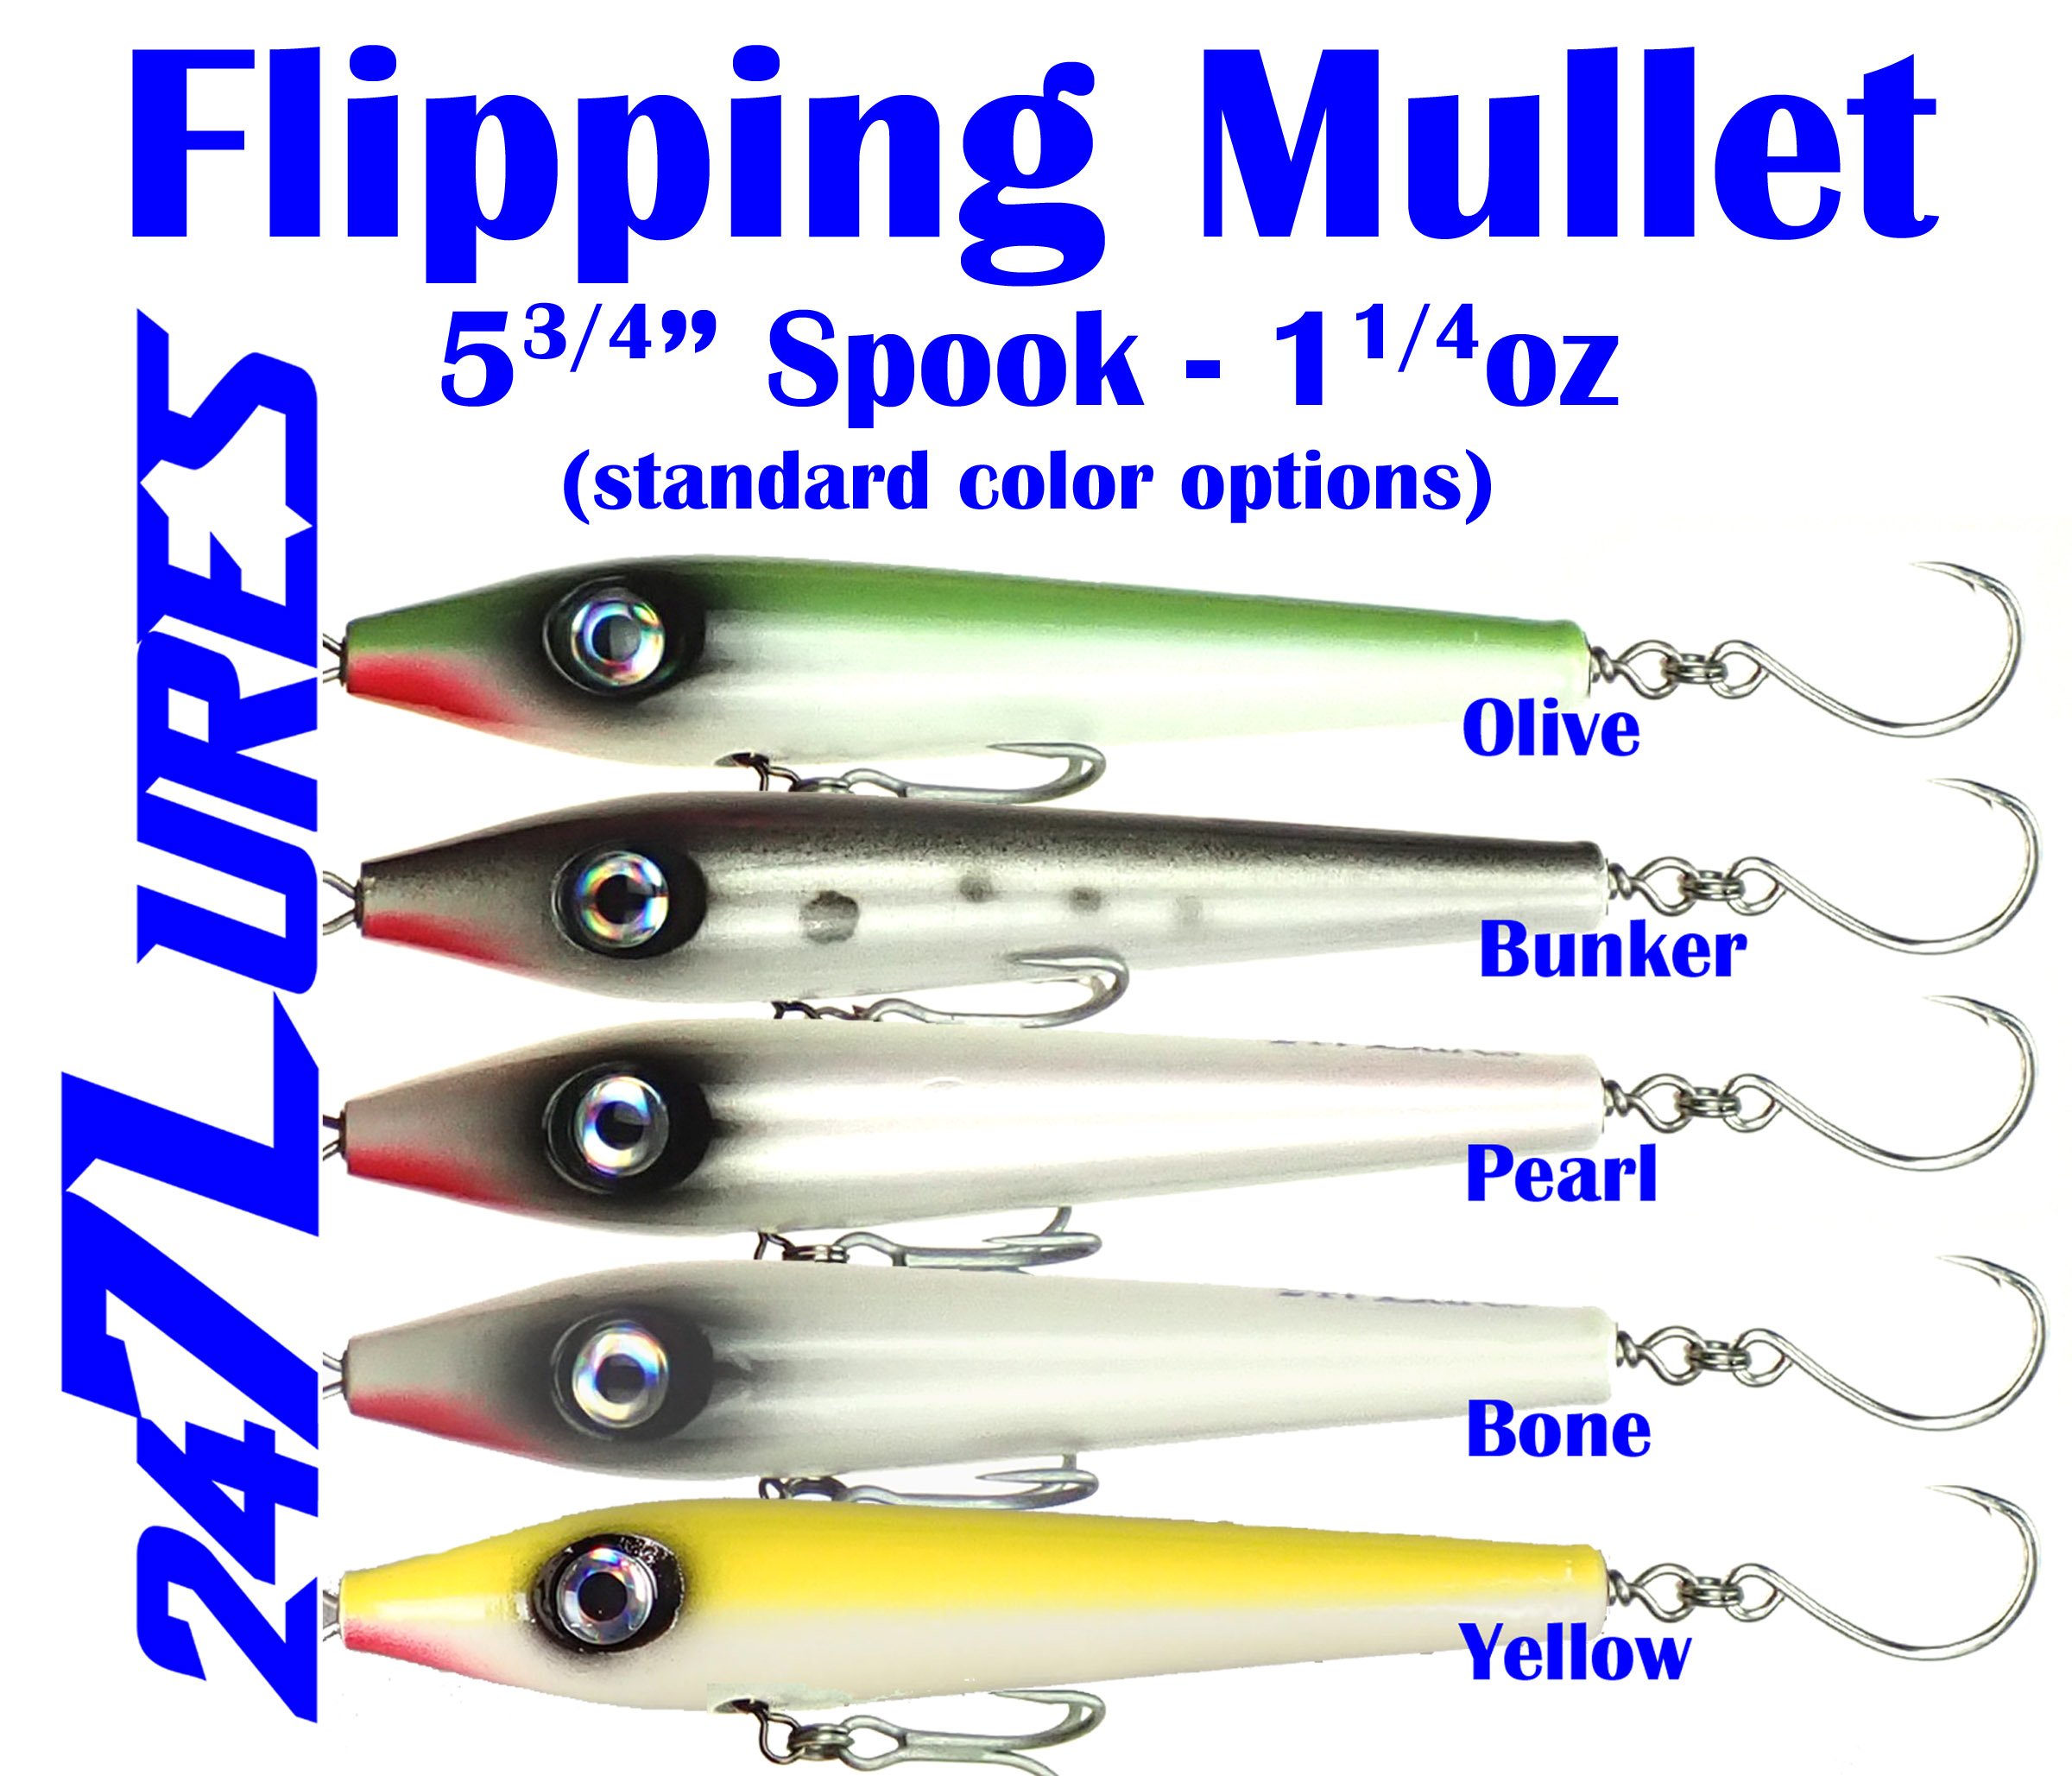 Mully Spook - 6.5 ~2oz — 247 Lures - Handmade wooden lures